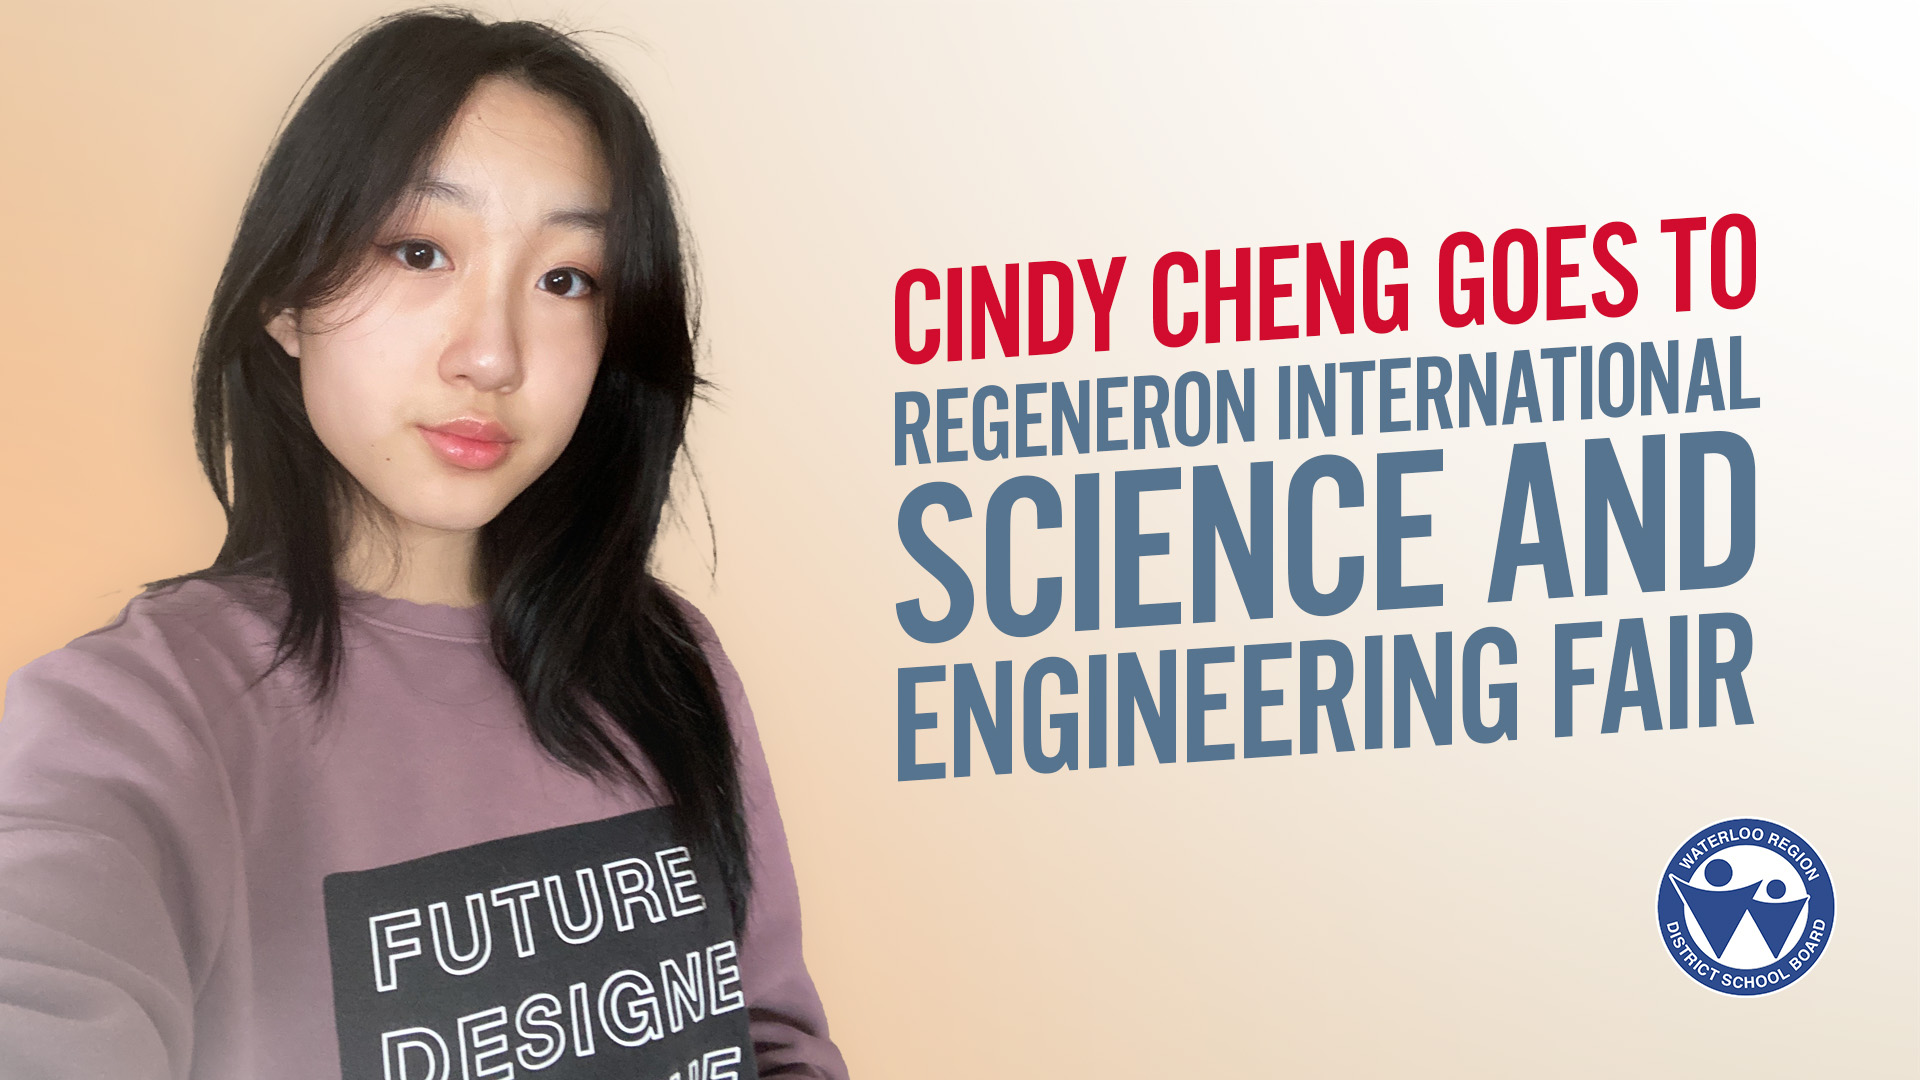 Cindy Cheng goes to Regeneron International Science and Engineering Fair